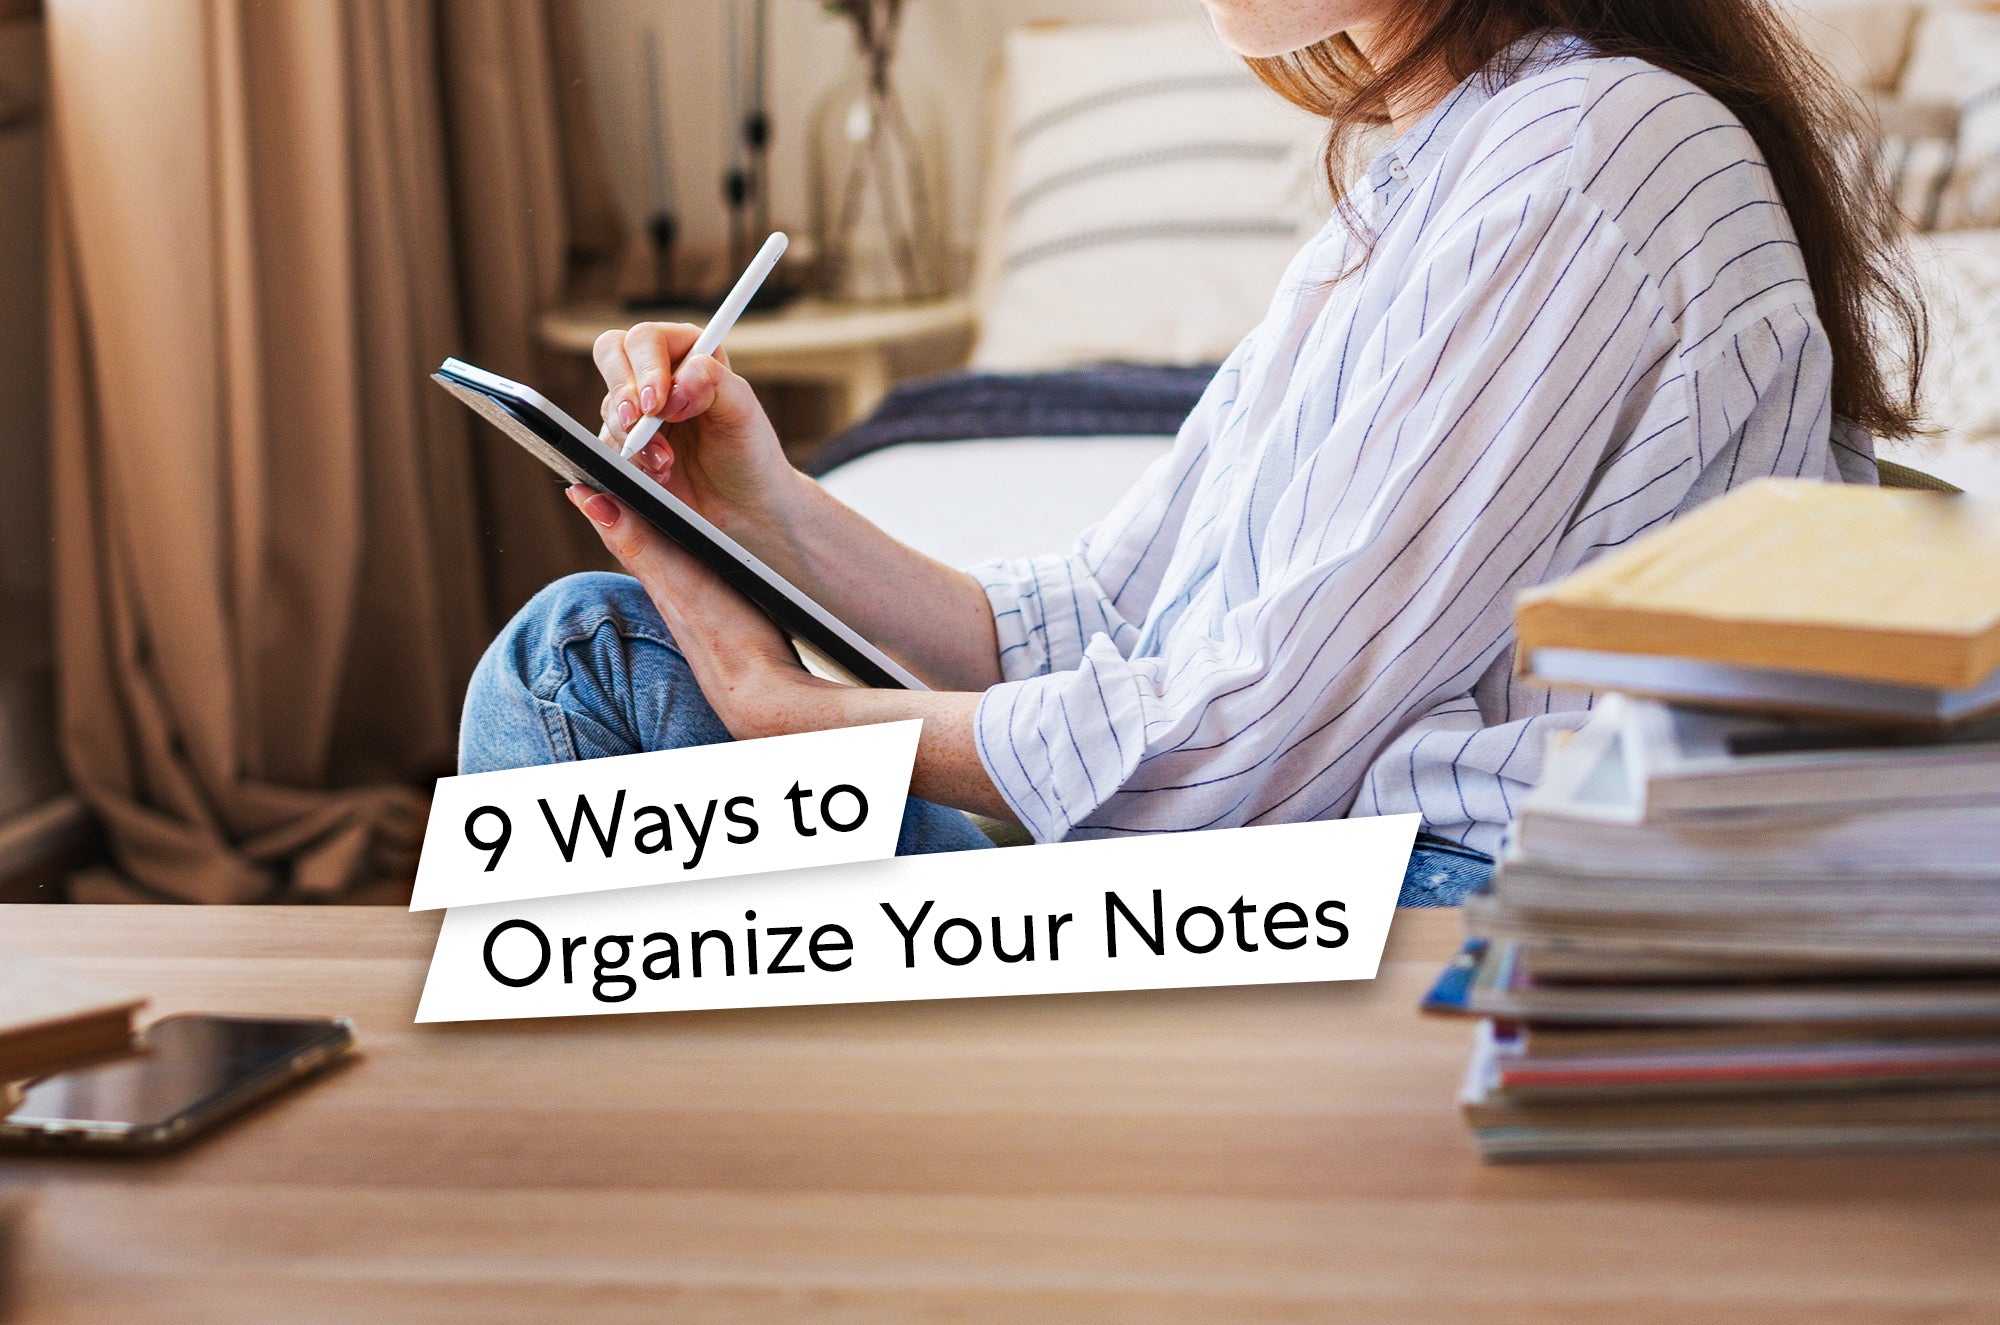 Organize your messy Notes app with these simple tips